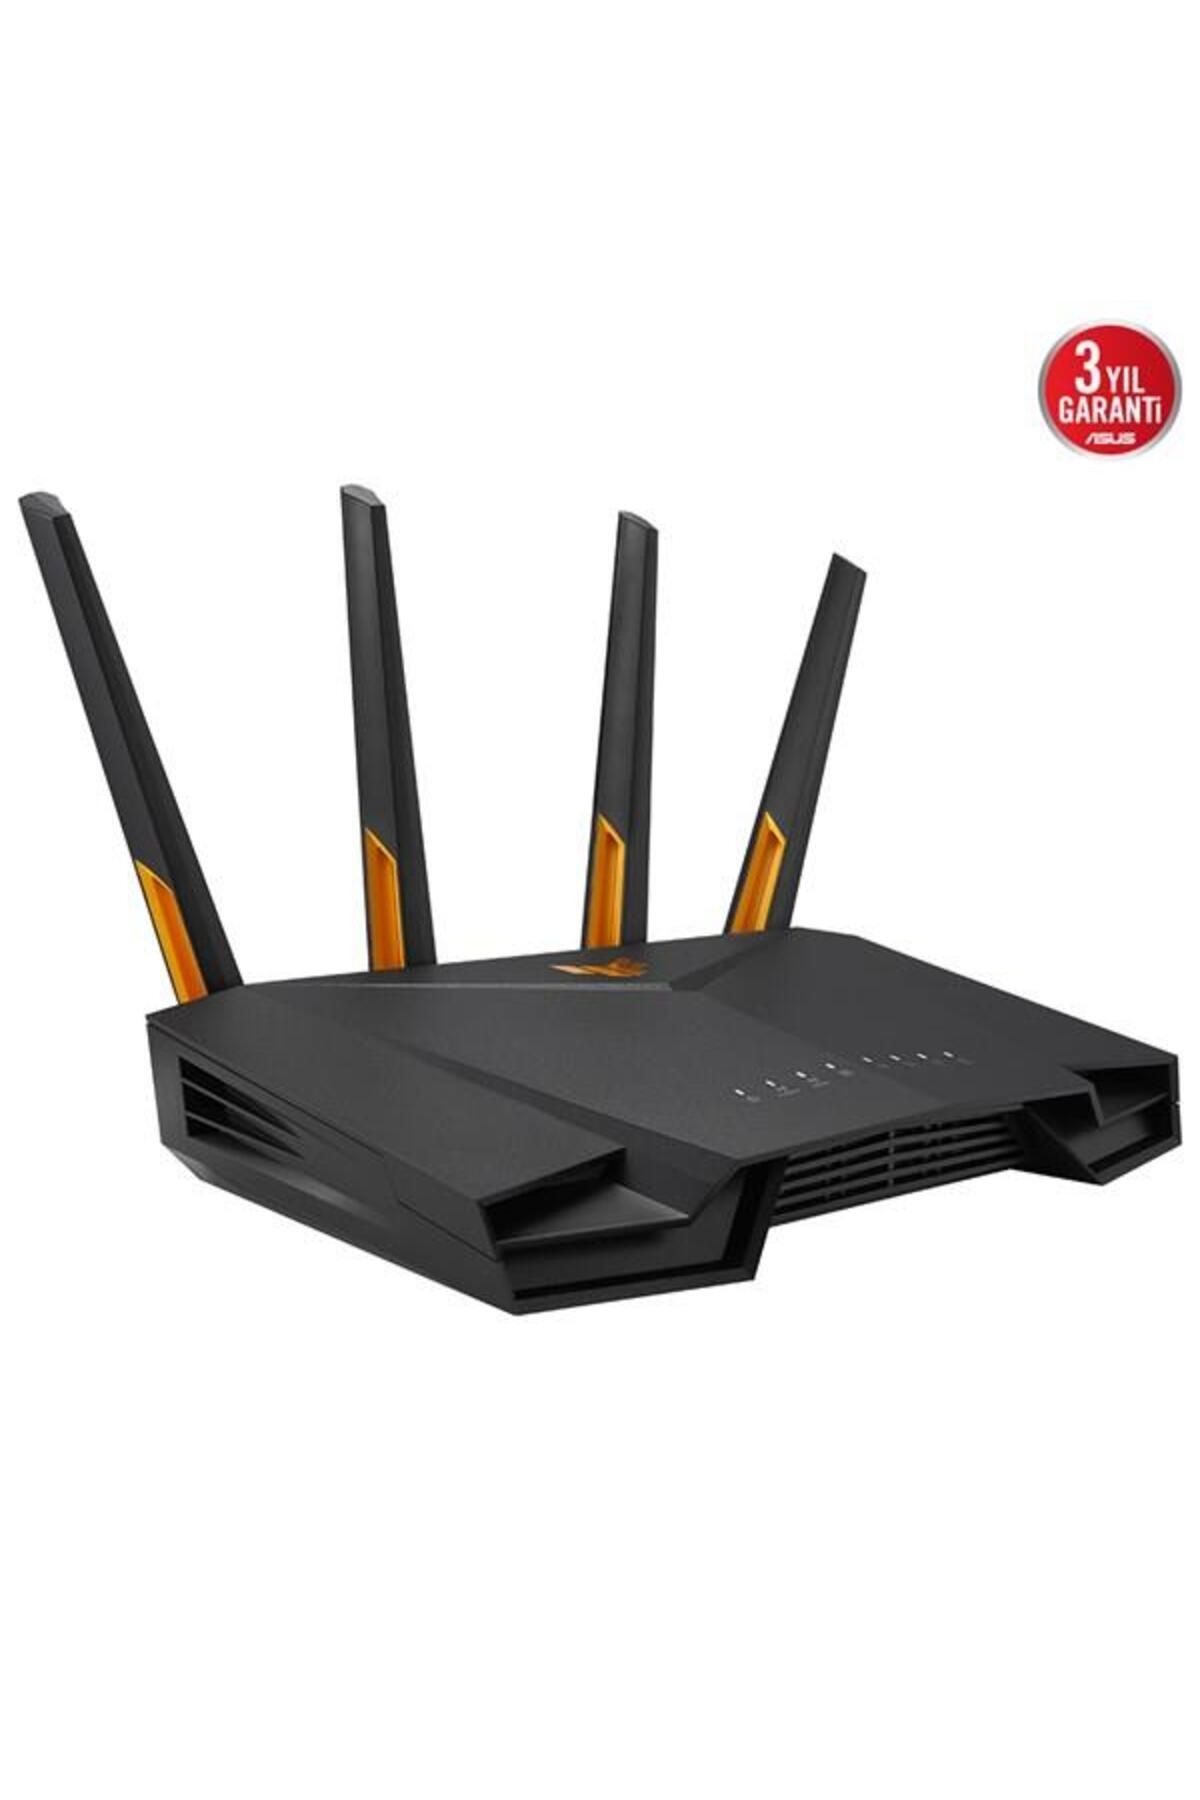 ASUS Tuf Gaming AX4200 4 Port 4200 Mbps Router